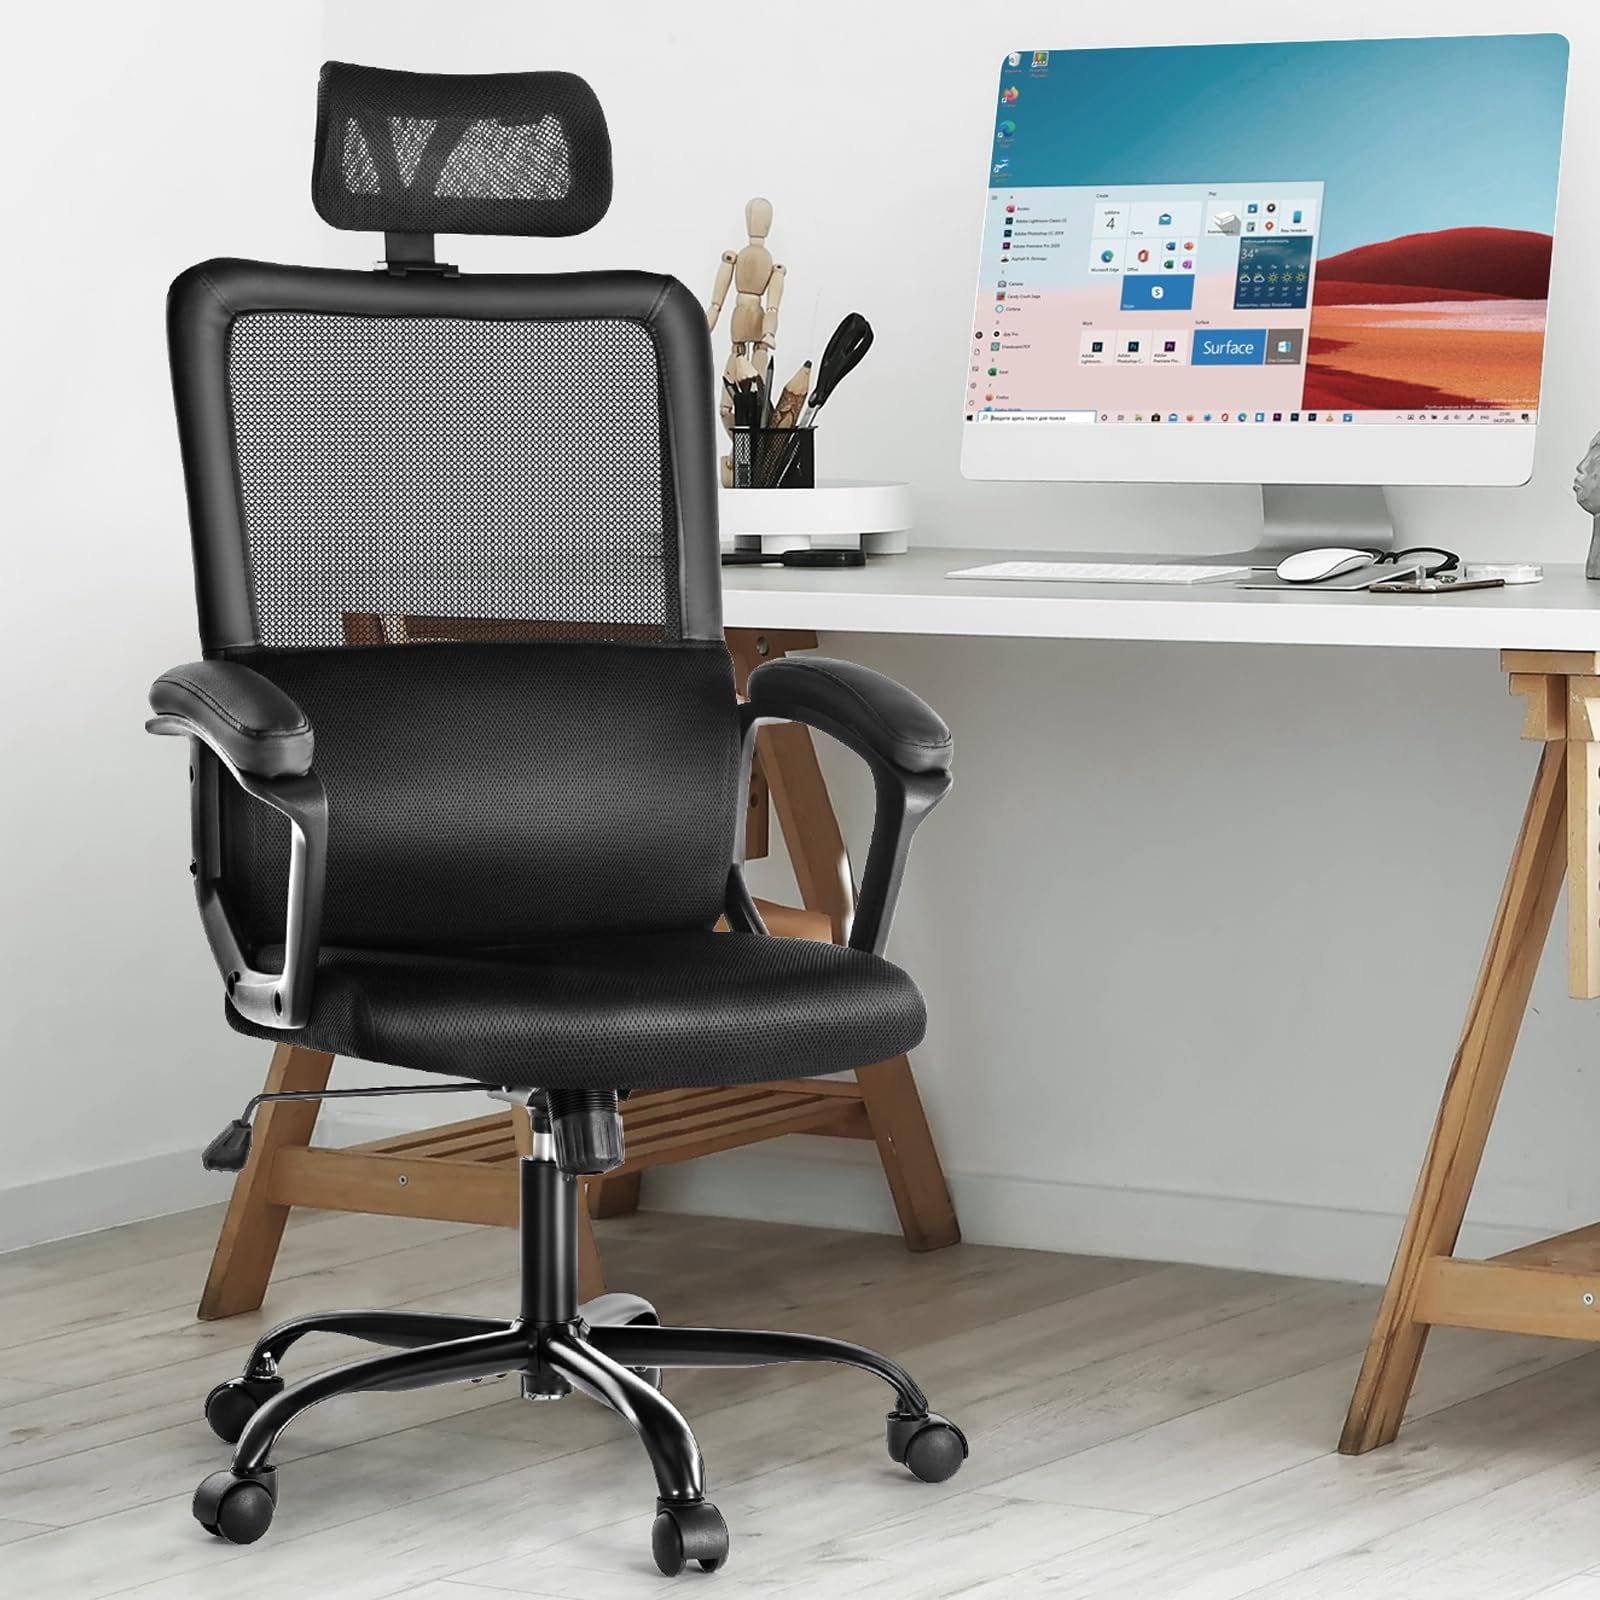 https://ak1.ostkcdn.com/images/products/is/images/direct/abde58fe04b4ed229962fe76c32a7a72dbd884d0/Ergonomic-Office-Chair-High-Back-Mesh-Gaming-Desk-Chair-with-Adjustable-Headrest-and-Lumbar-Support.jpg